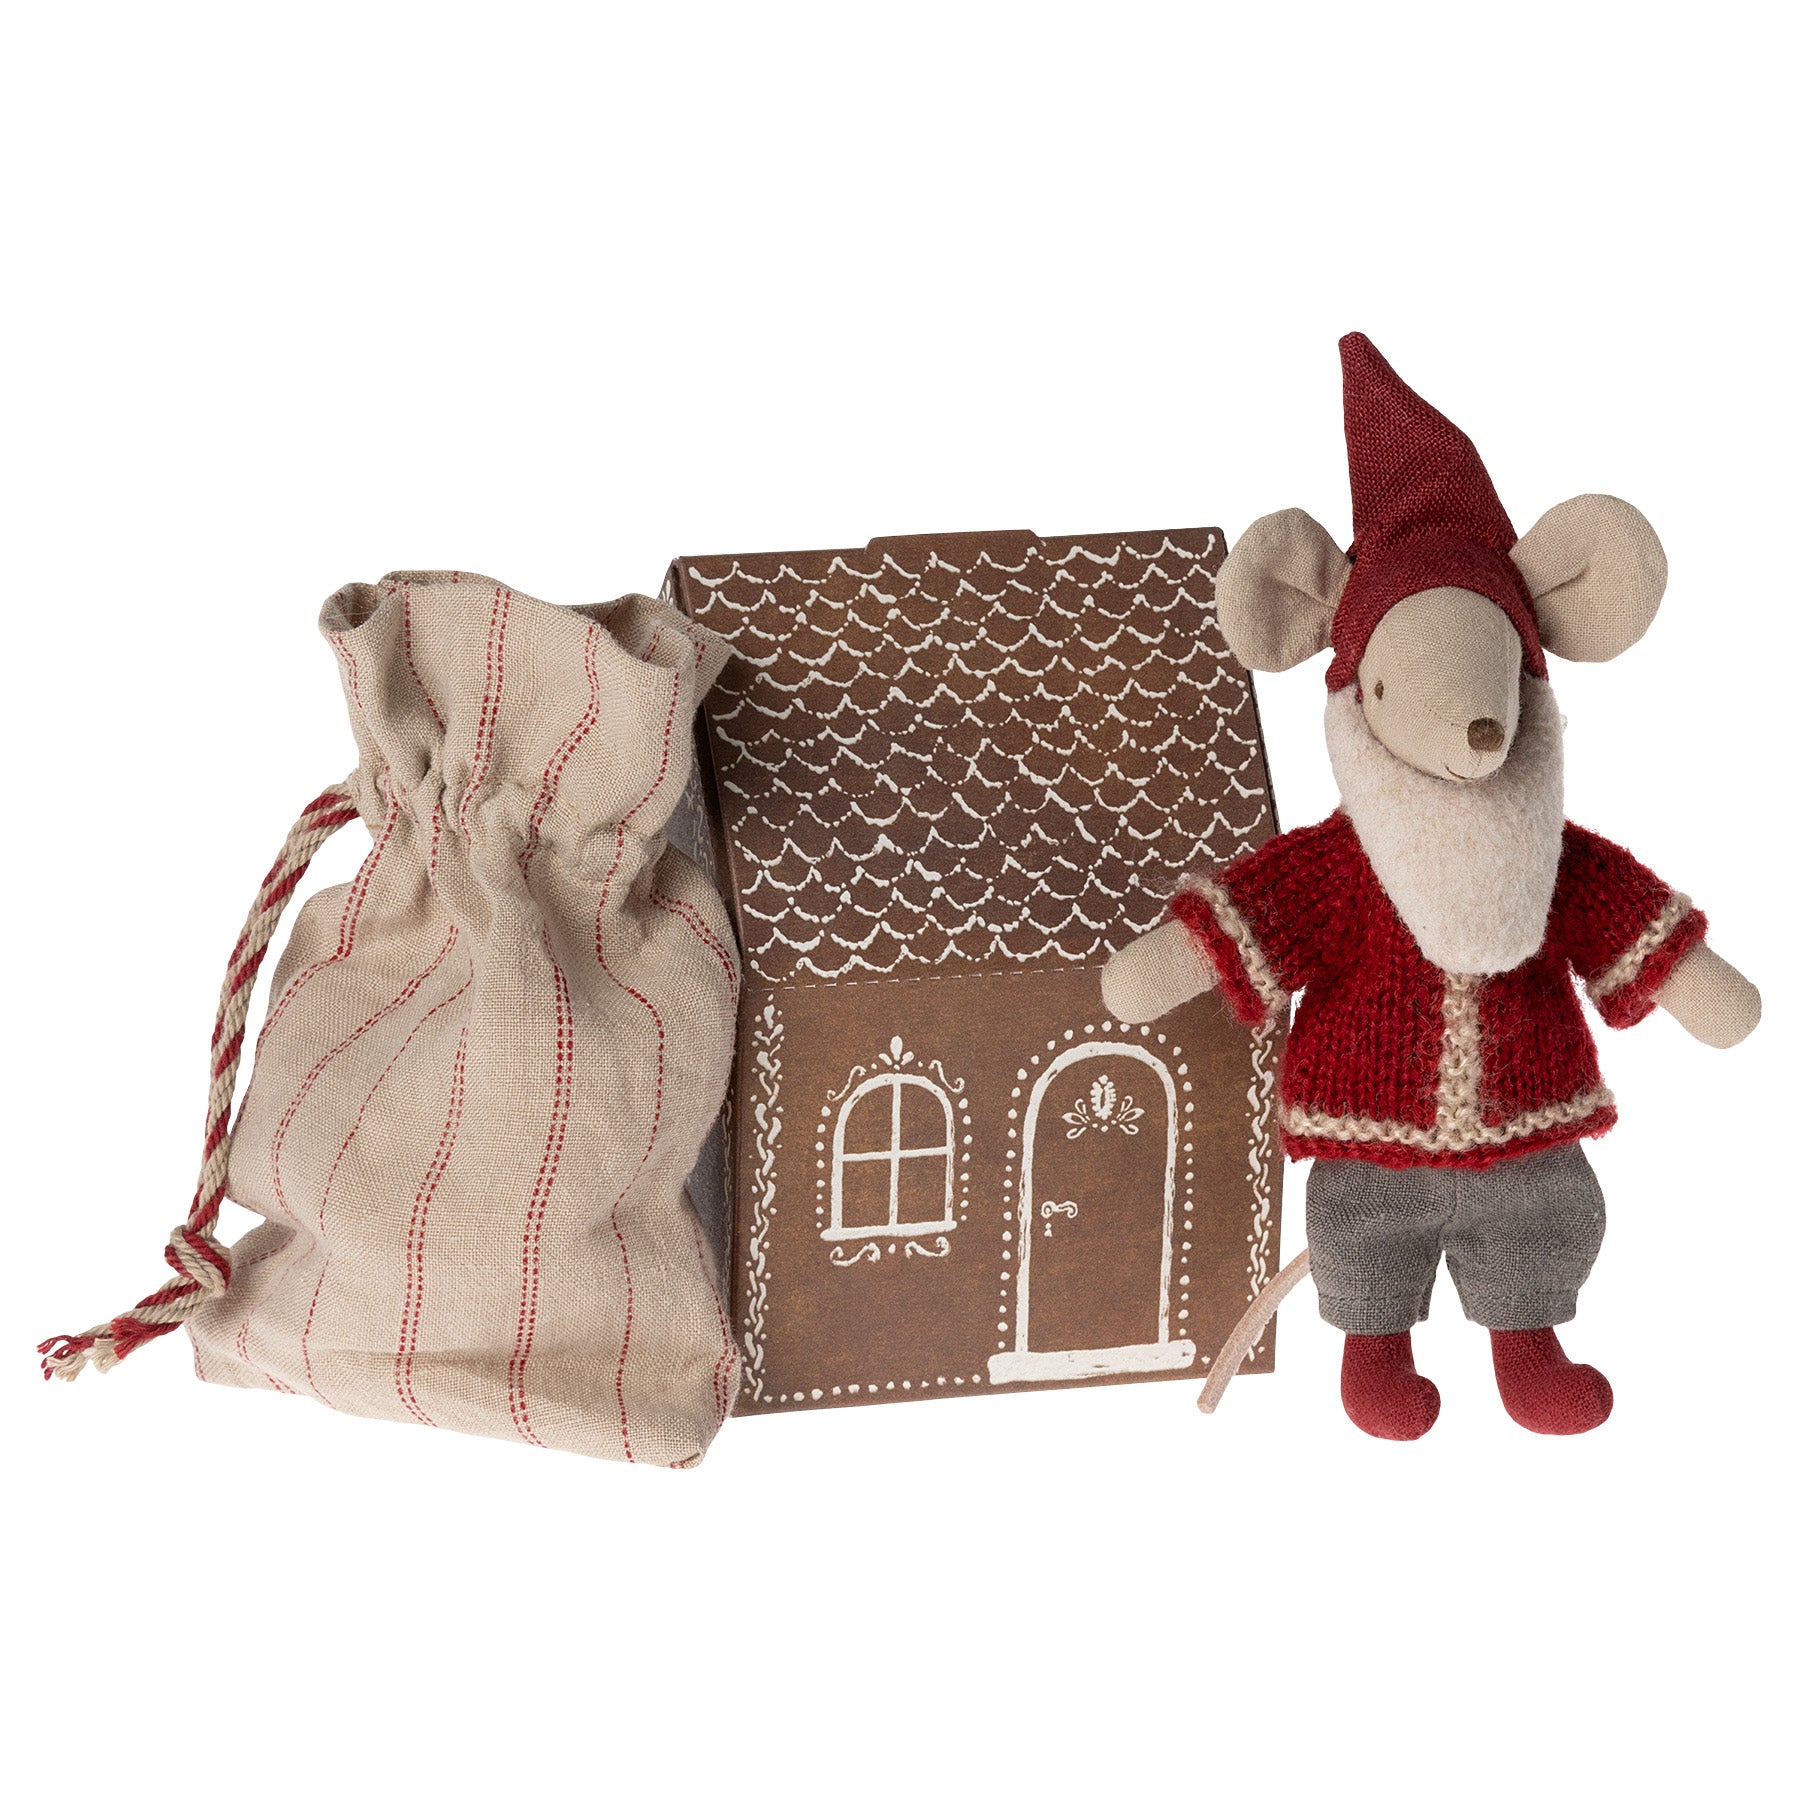 maileg mouse dressed as santa with sack and gingerbread house box